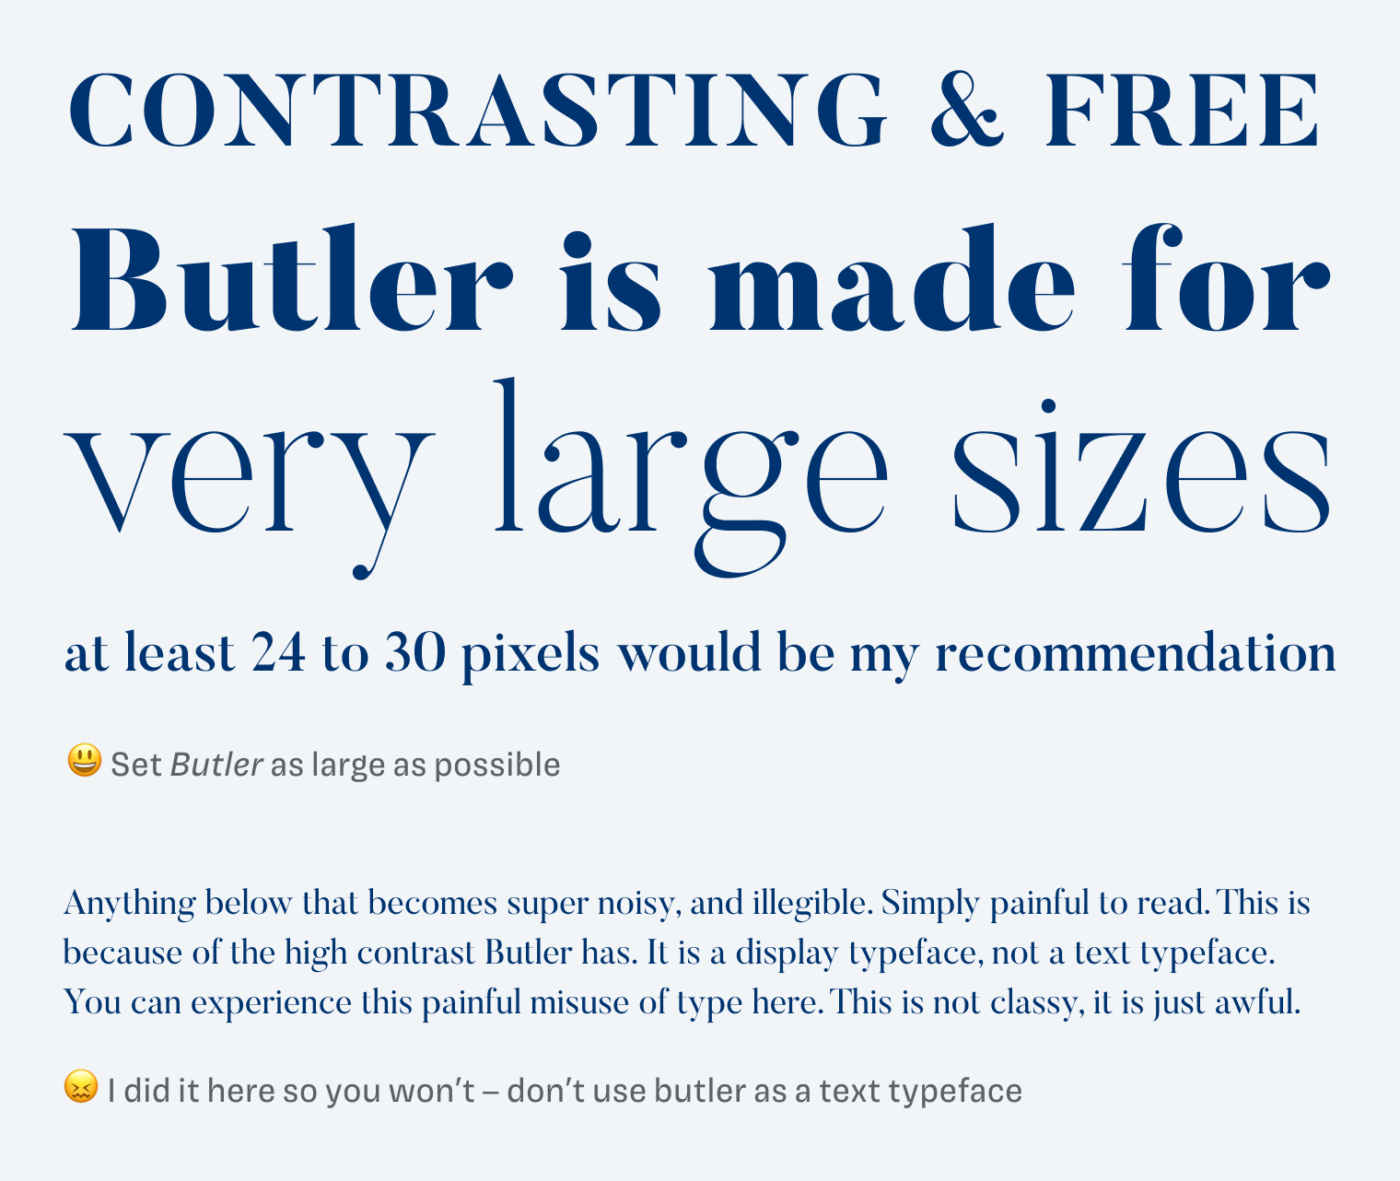 contrasting & free – Butler is made for very large sizes at least 24 to 30 pixels would be my recommendation 😃 Set Butler as large as possible. Anything below that becomes super noisy, and illegible. Simply painful to read. This is because of the high contrast Butler has. It is a display typeface, not a text typeface. You can experience this painful misuse of type here. This is not classy, it is just awful. 😖 I did it here so you won’t – don’t use butler as a text typeface